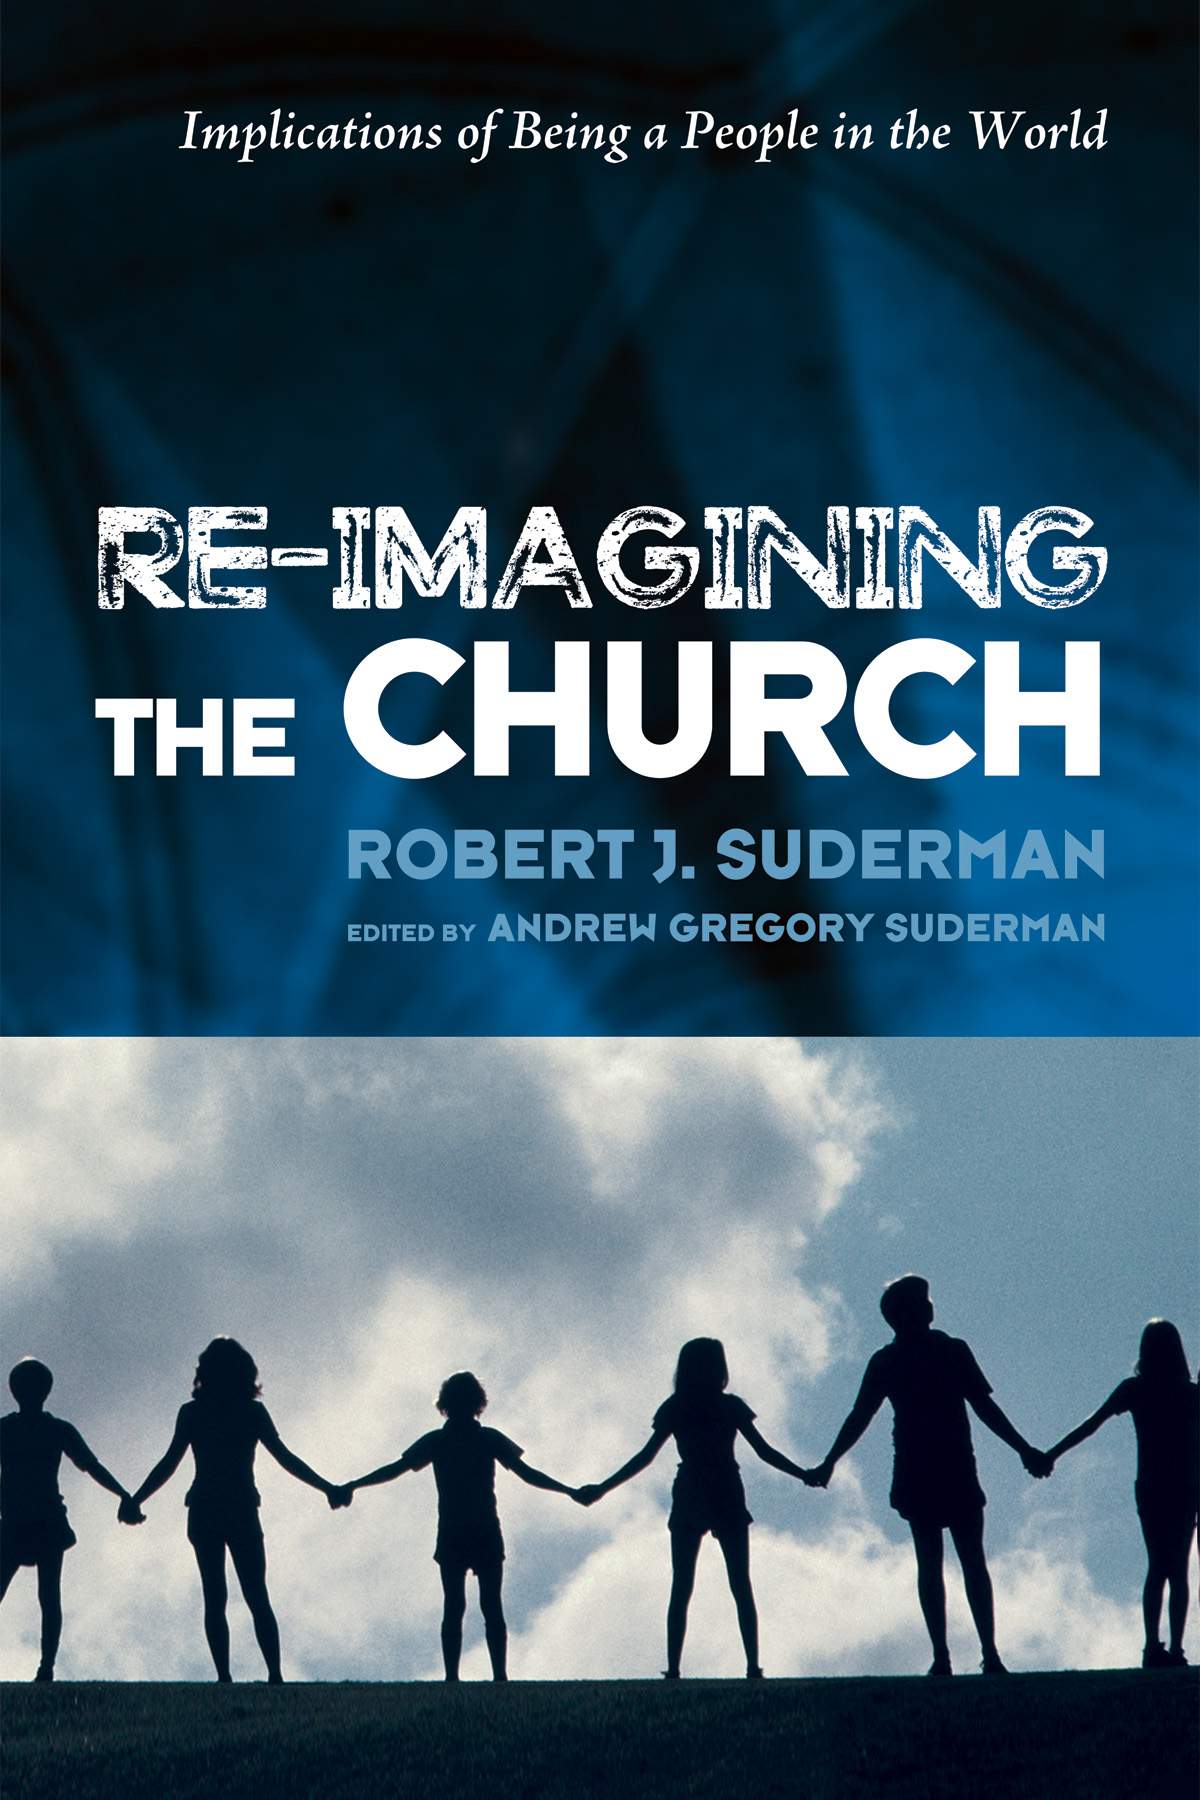 Re-Imagining the Church: Implications of Being a People in the World